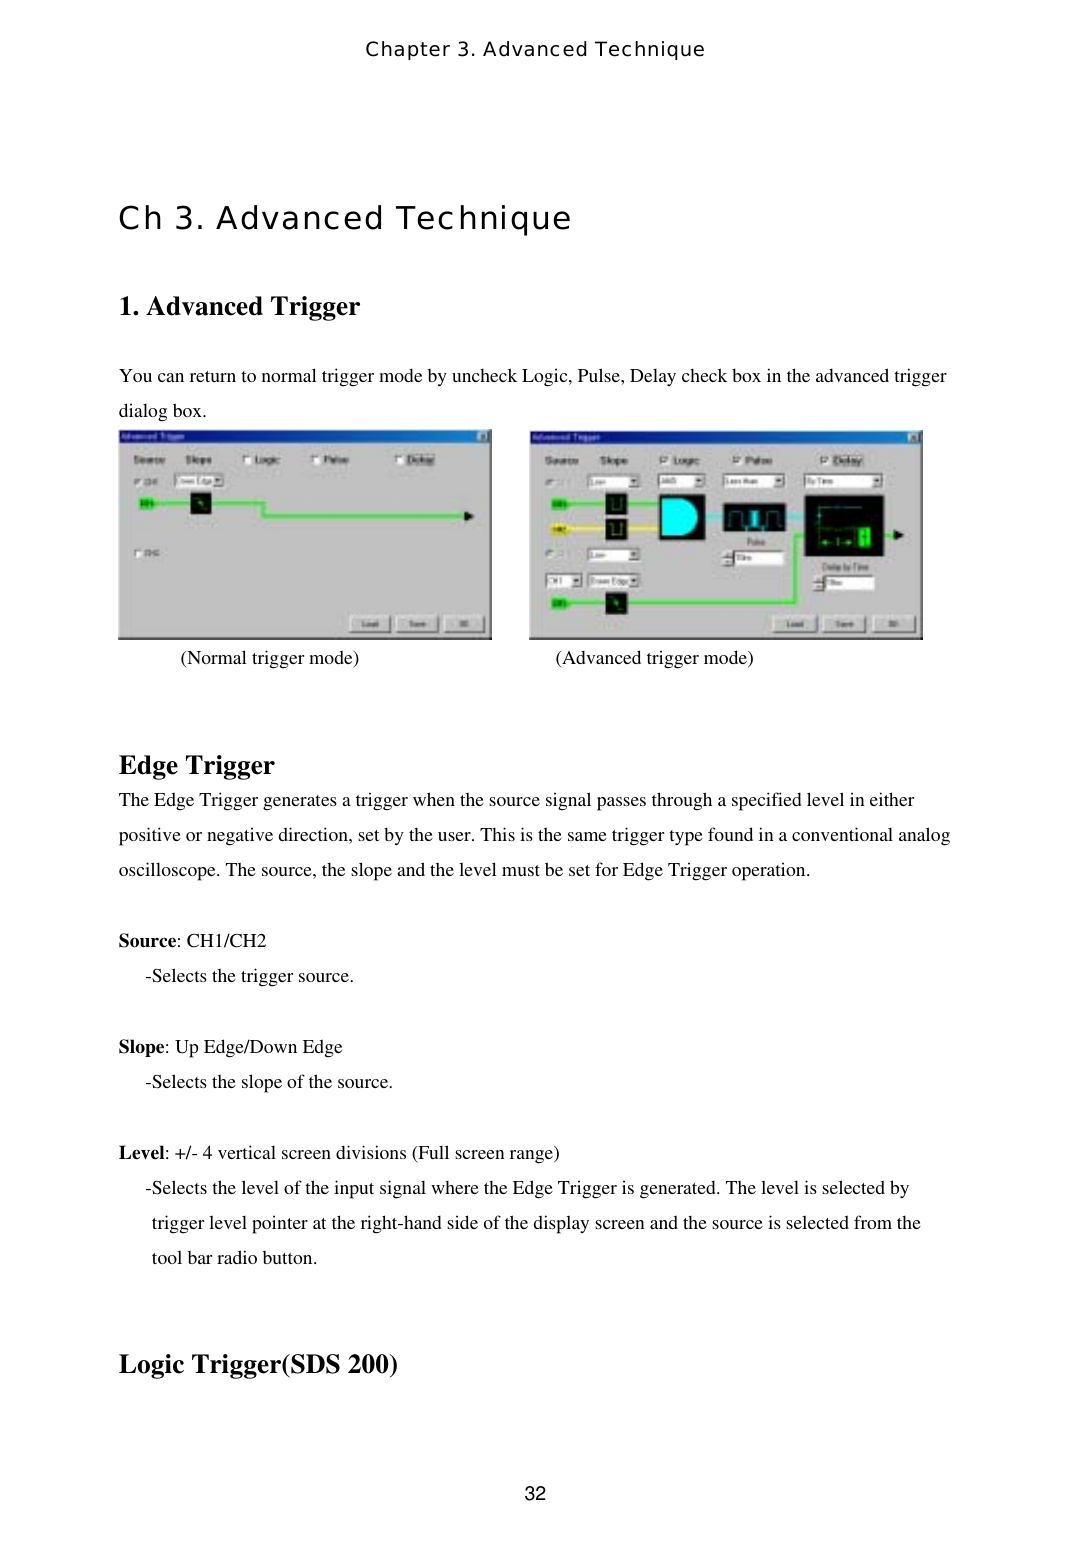 Chapter 3. Advanced Technique  32 Ch 3. Advanced Technique  1. Advanced Trigger  You can return to normal trigger mode by uncheck Logic, Pulse, Delay check box in the advanced trigger dialog box.              (Normal trigger mode)                         (Advanced trigger mode)   Edge Trigger The Edge Trigger generates a trigger when the source signal passes through a specified level in either positive or negative direction, set by the user. This is the same trigger type found in a conventional analog oscilloscope. The source, the slope and the level must be set for Edge Trigger operation.   Source: CH1/CH2 -Selects the trigger source.  Slope: Up Edge/Down Edge -Selects the slope of the source.  Level: +/- 4 vertical screen divisions (Full screen range) -Selects the level of the input signal where the Edge Trigger is generated. The level is selected by trigger level pointer at the right-hand side of the display screen and the source is selected from the tool bar radio button.   Logic Trigger(SDS 200)  